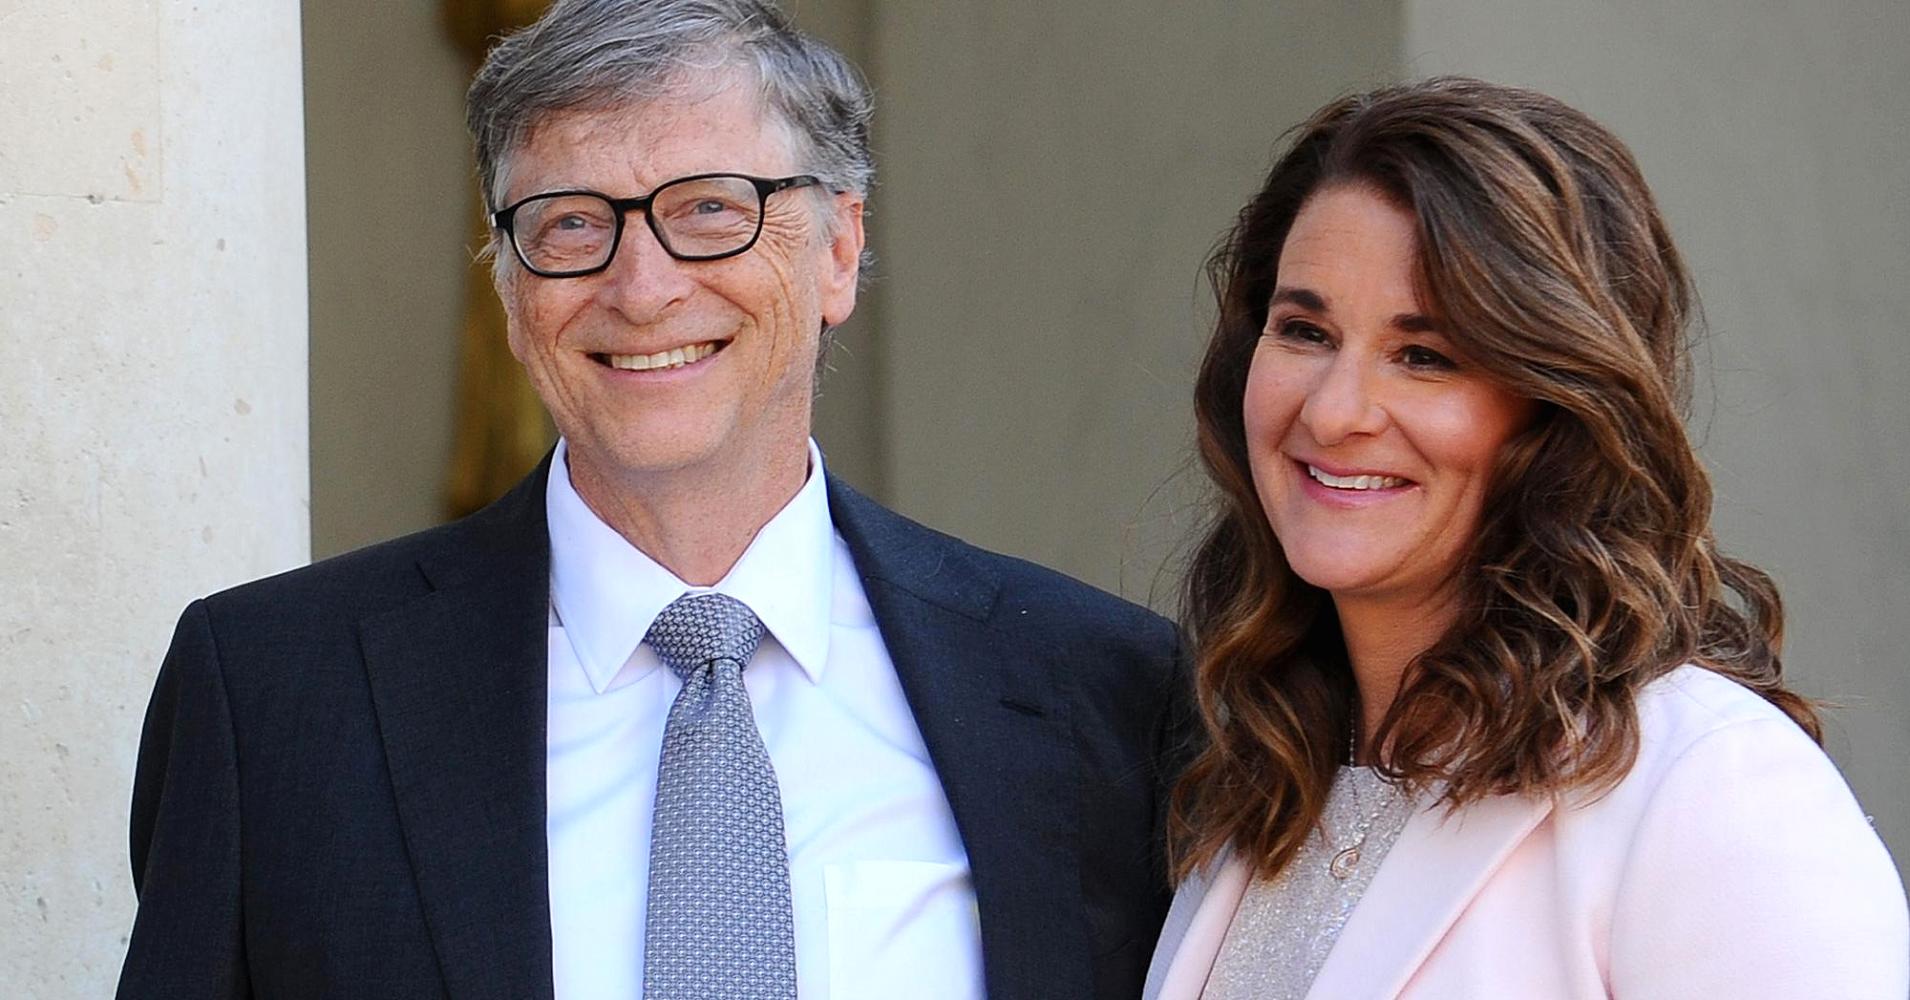 Bill Gates shares advice on how tech titans should deal with the government